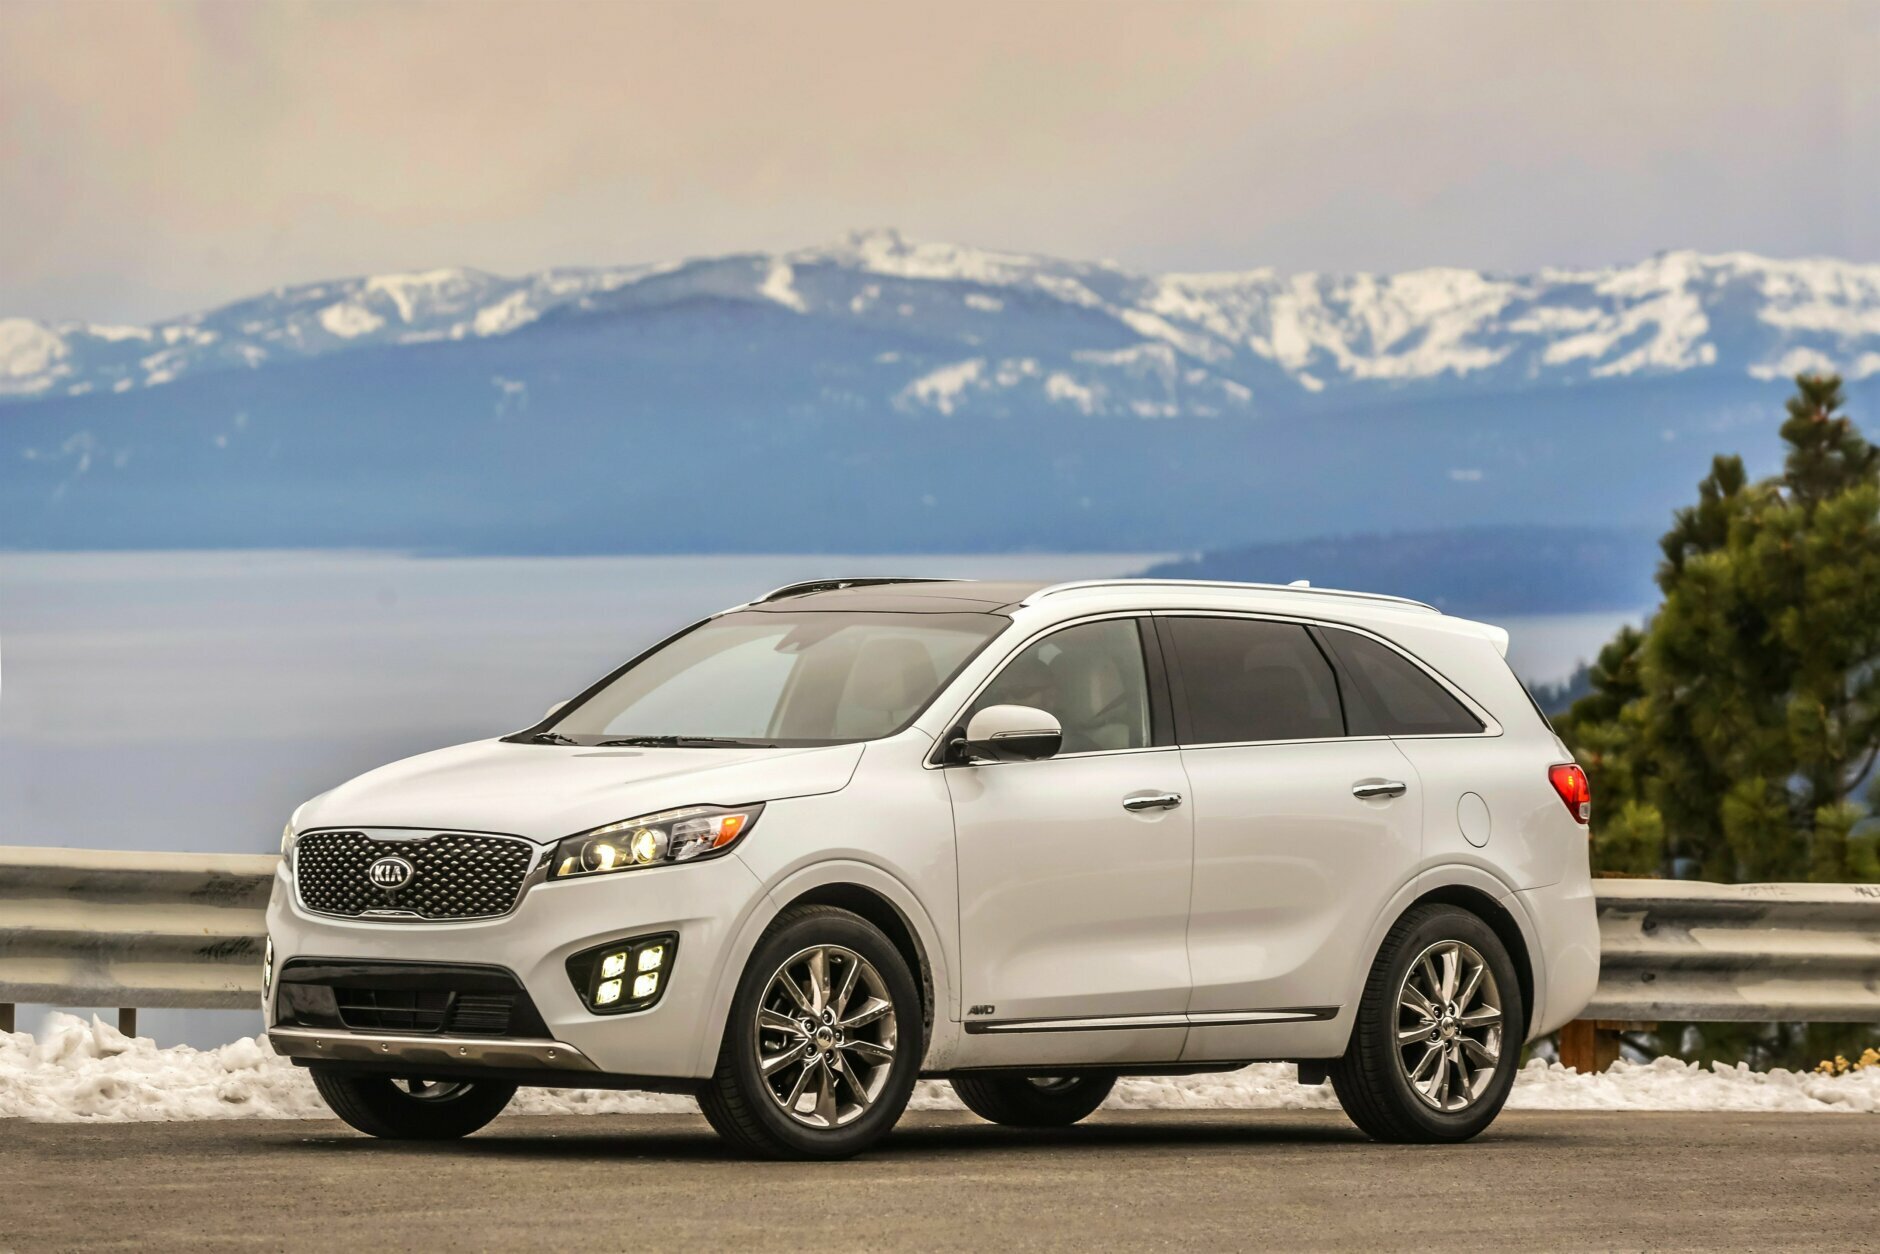 <p><strong>Best used mid-size SUV for teens:</strong> The 2017 Kia Sorento</p>
